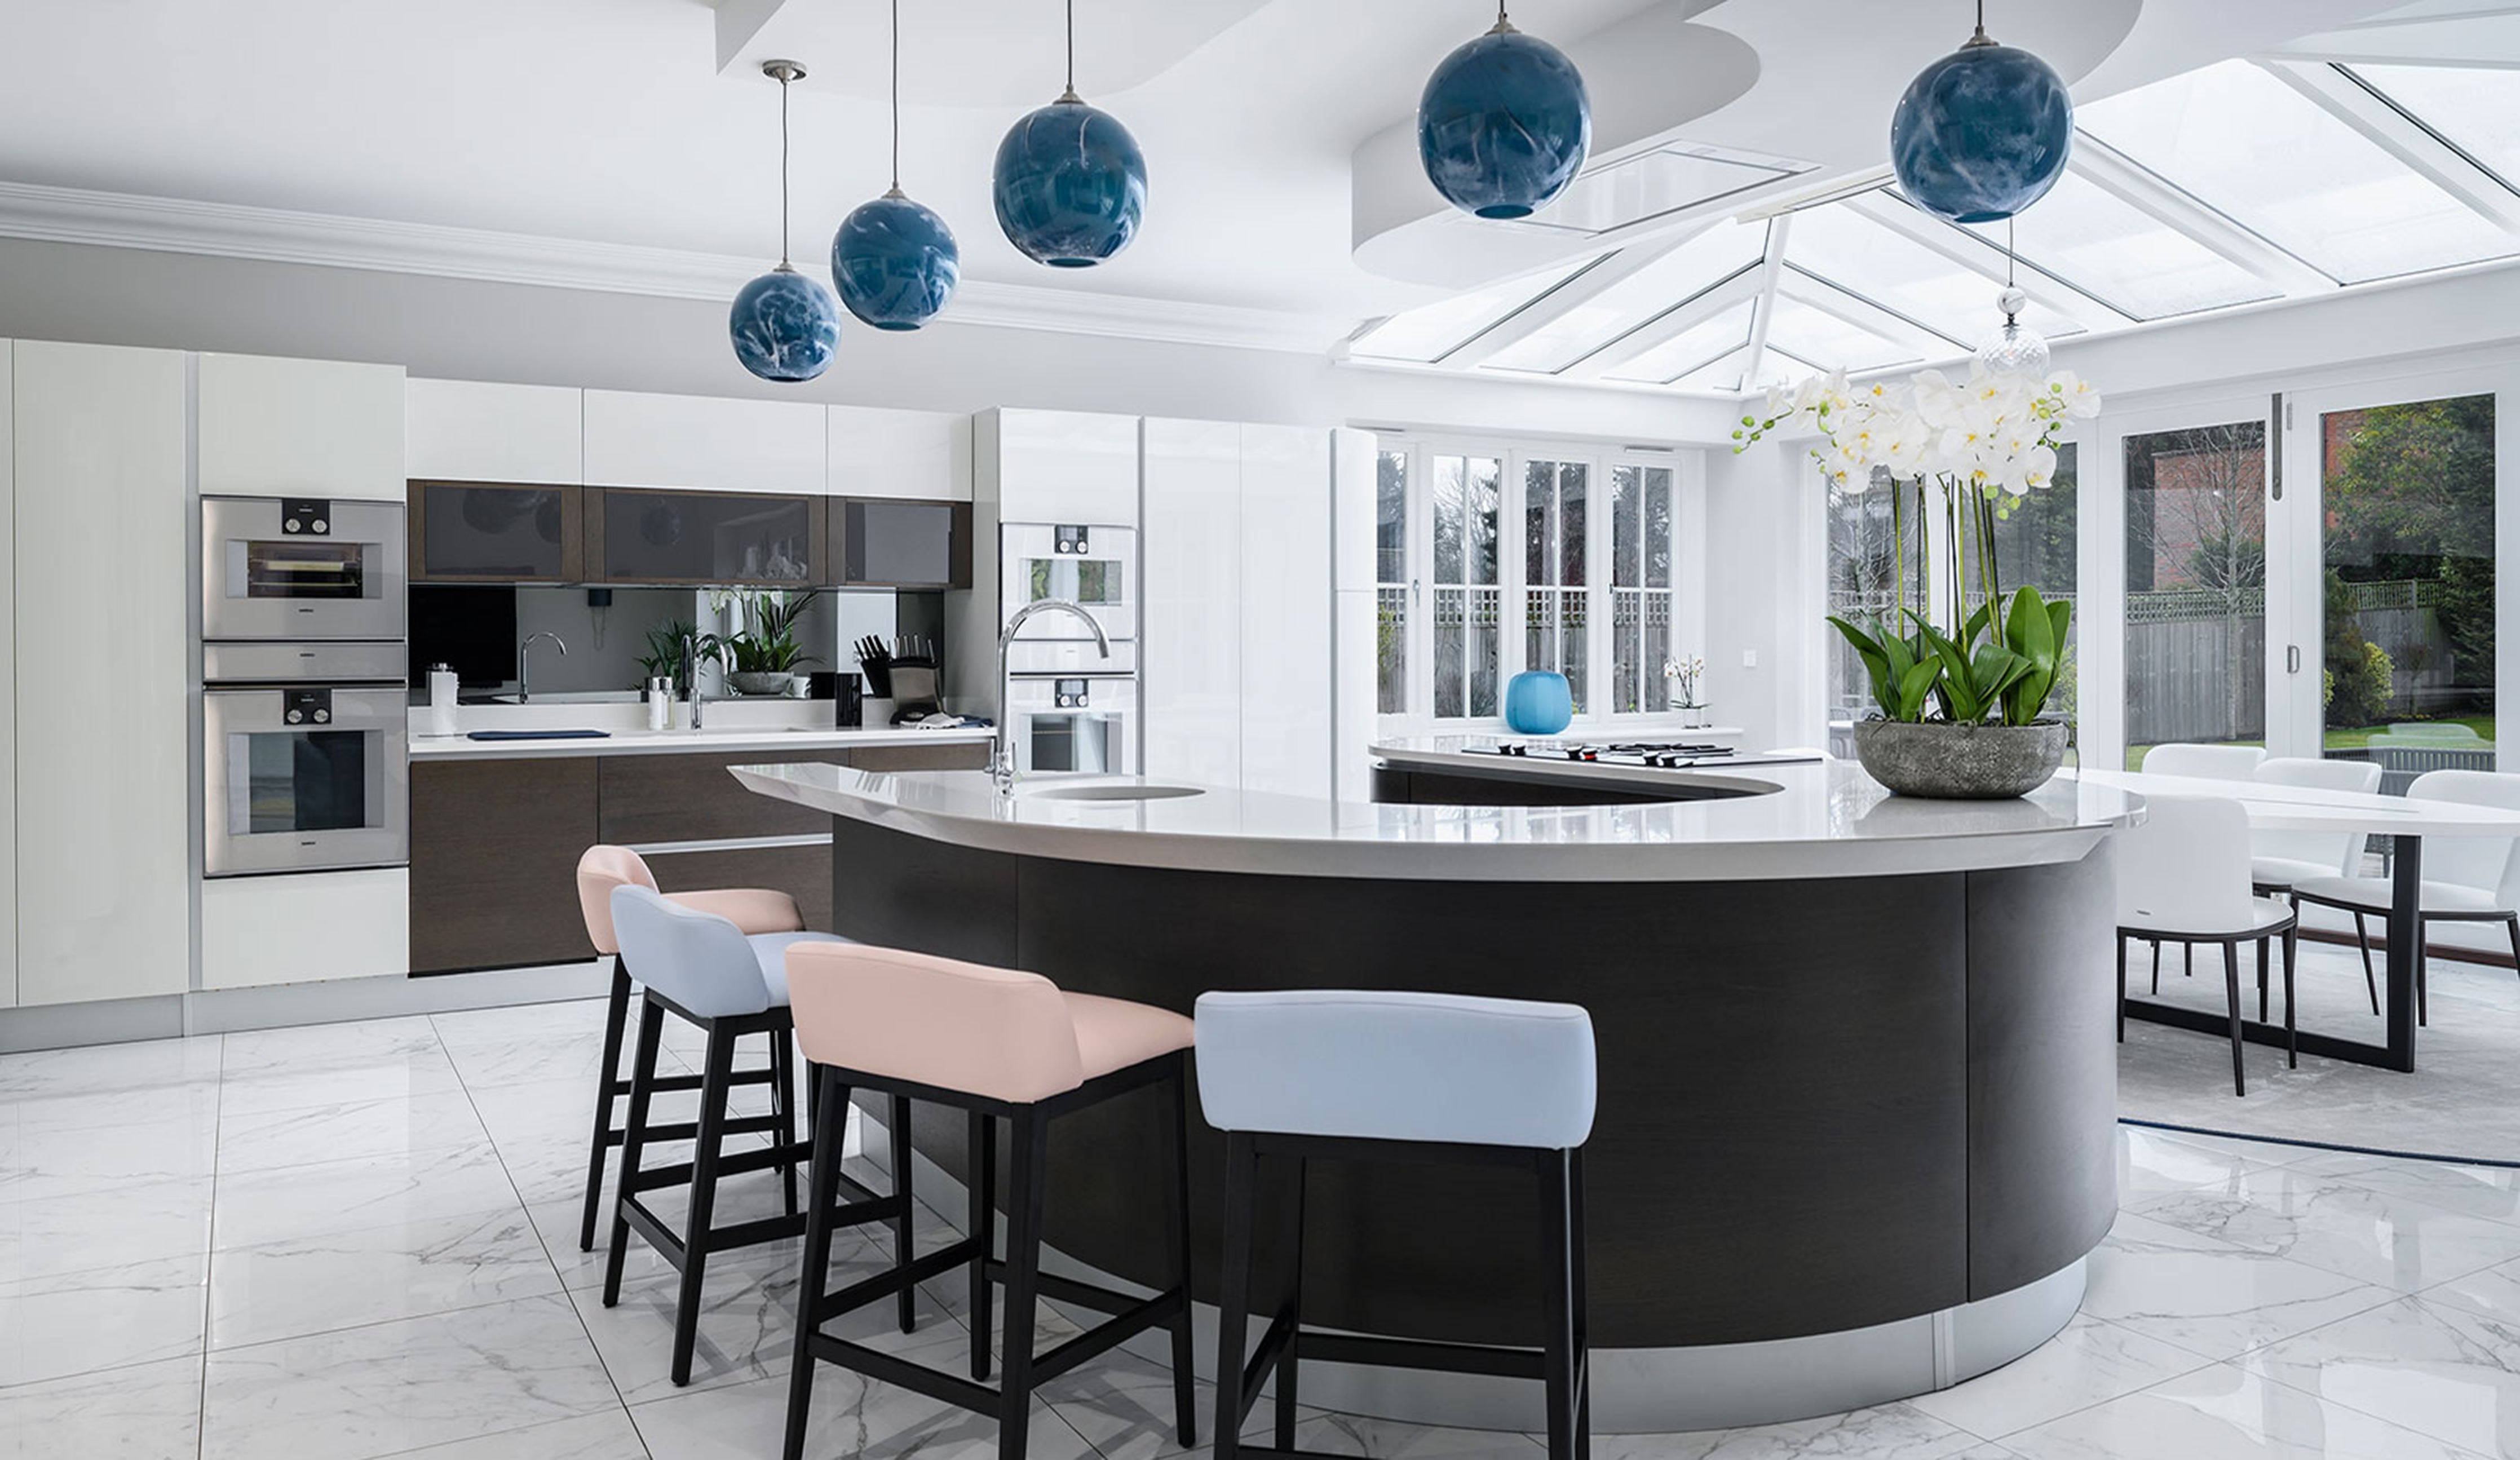 Rothschild &amp; Bickers Lazurite Mineral glass pendant lighting hanging over a kitchen island